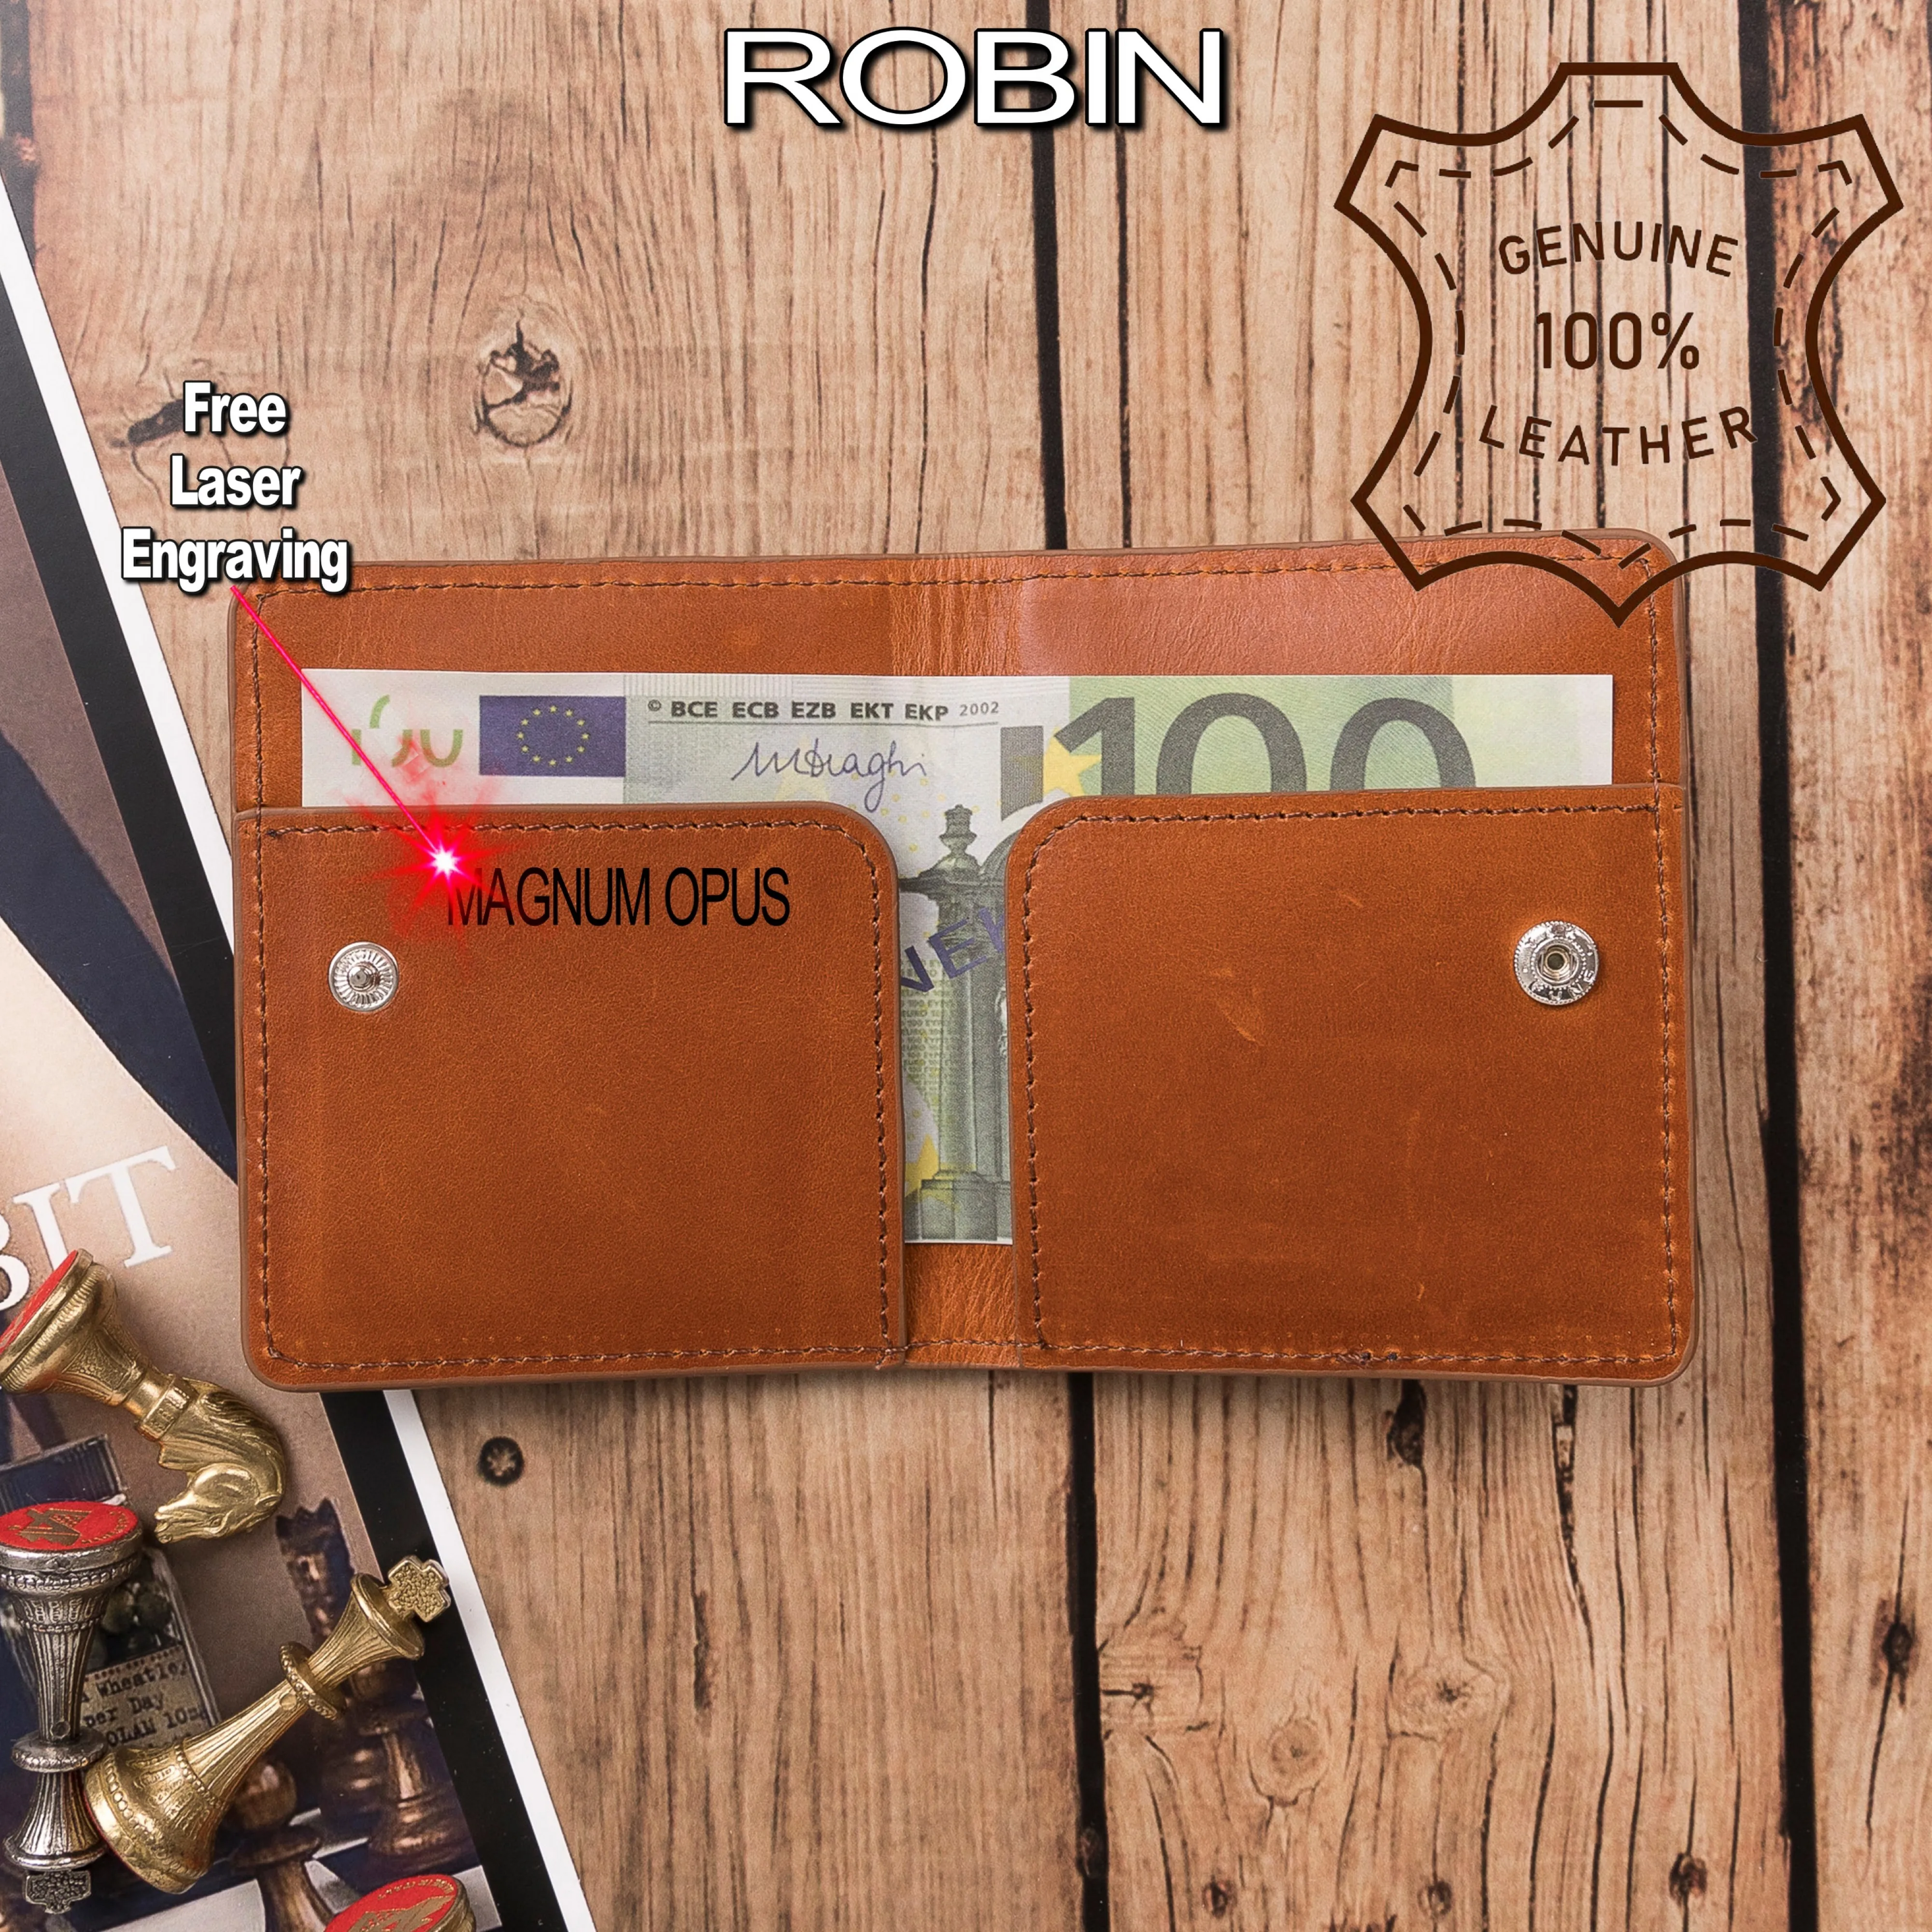 Handmade Genuine Leather Robin Credit Card, Cash and ID Card Holder Wallet Stores Up To 6 Cards Elegant Stylish Card Holder